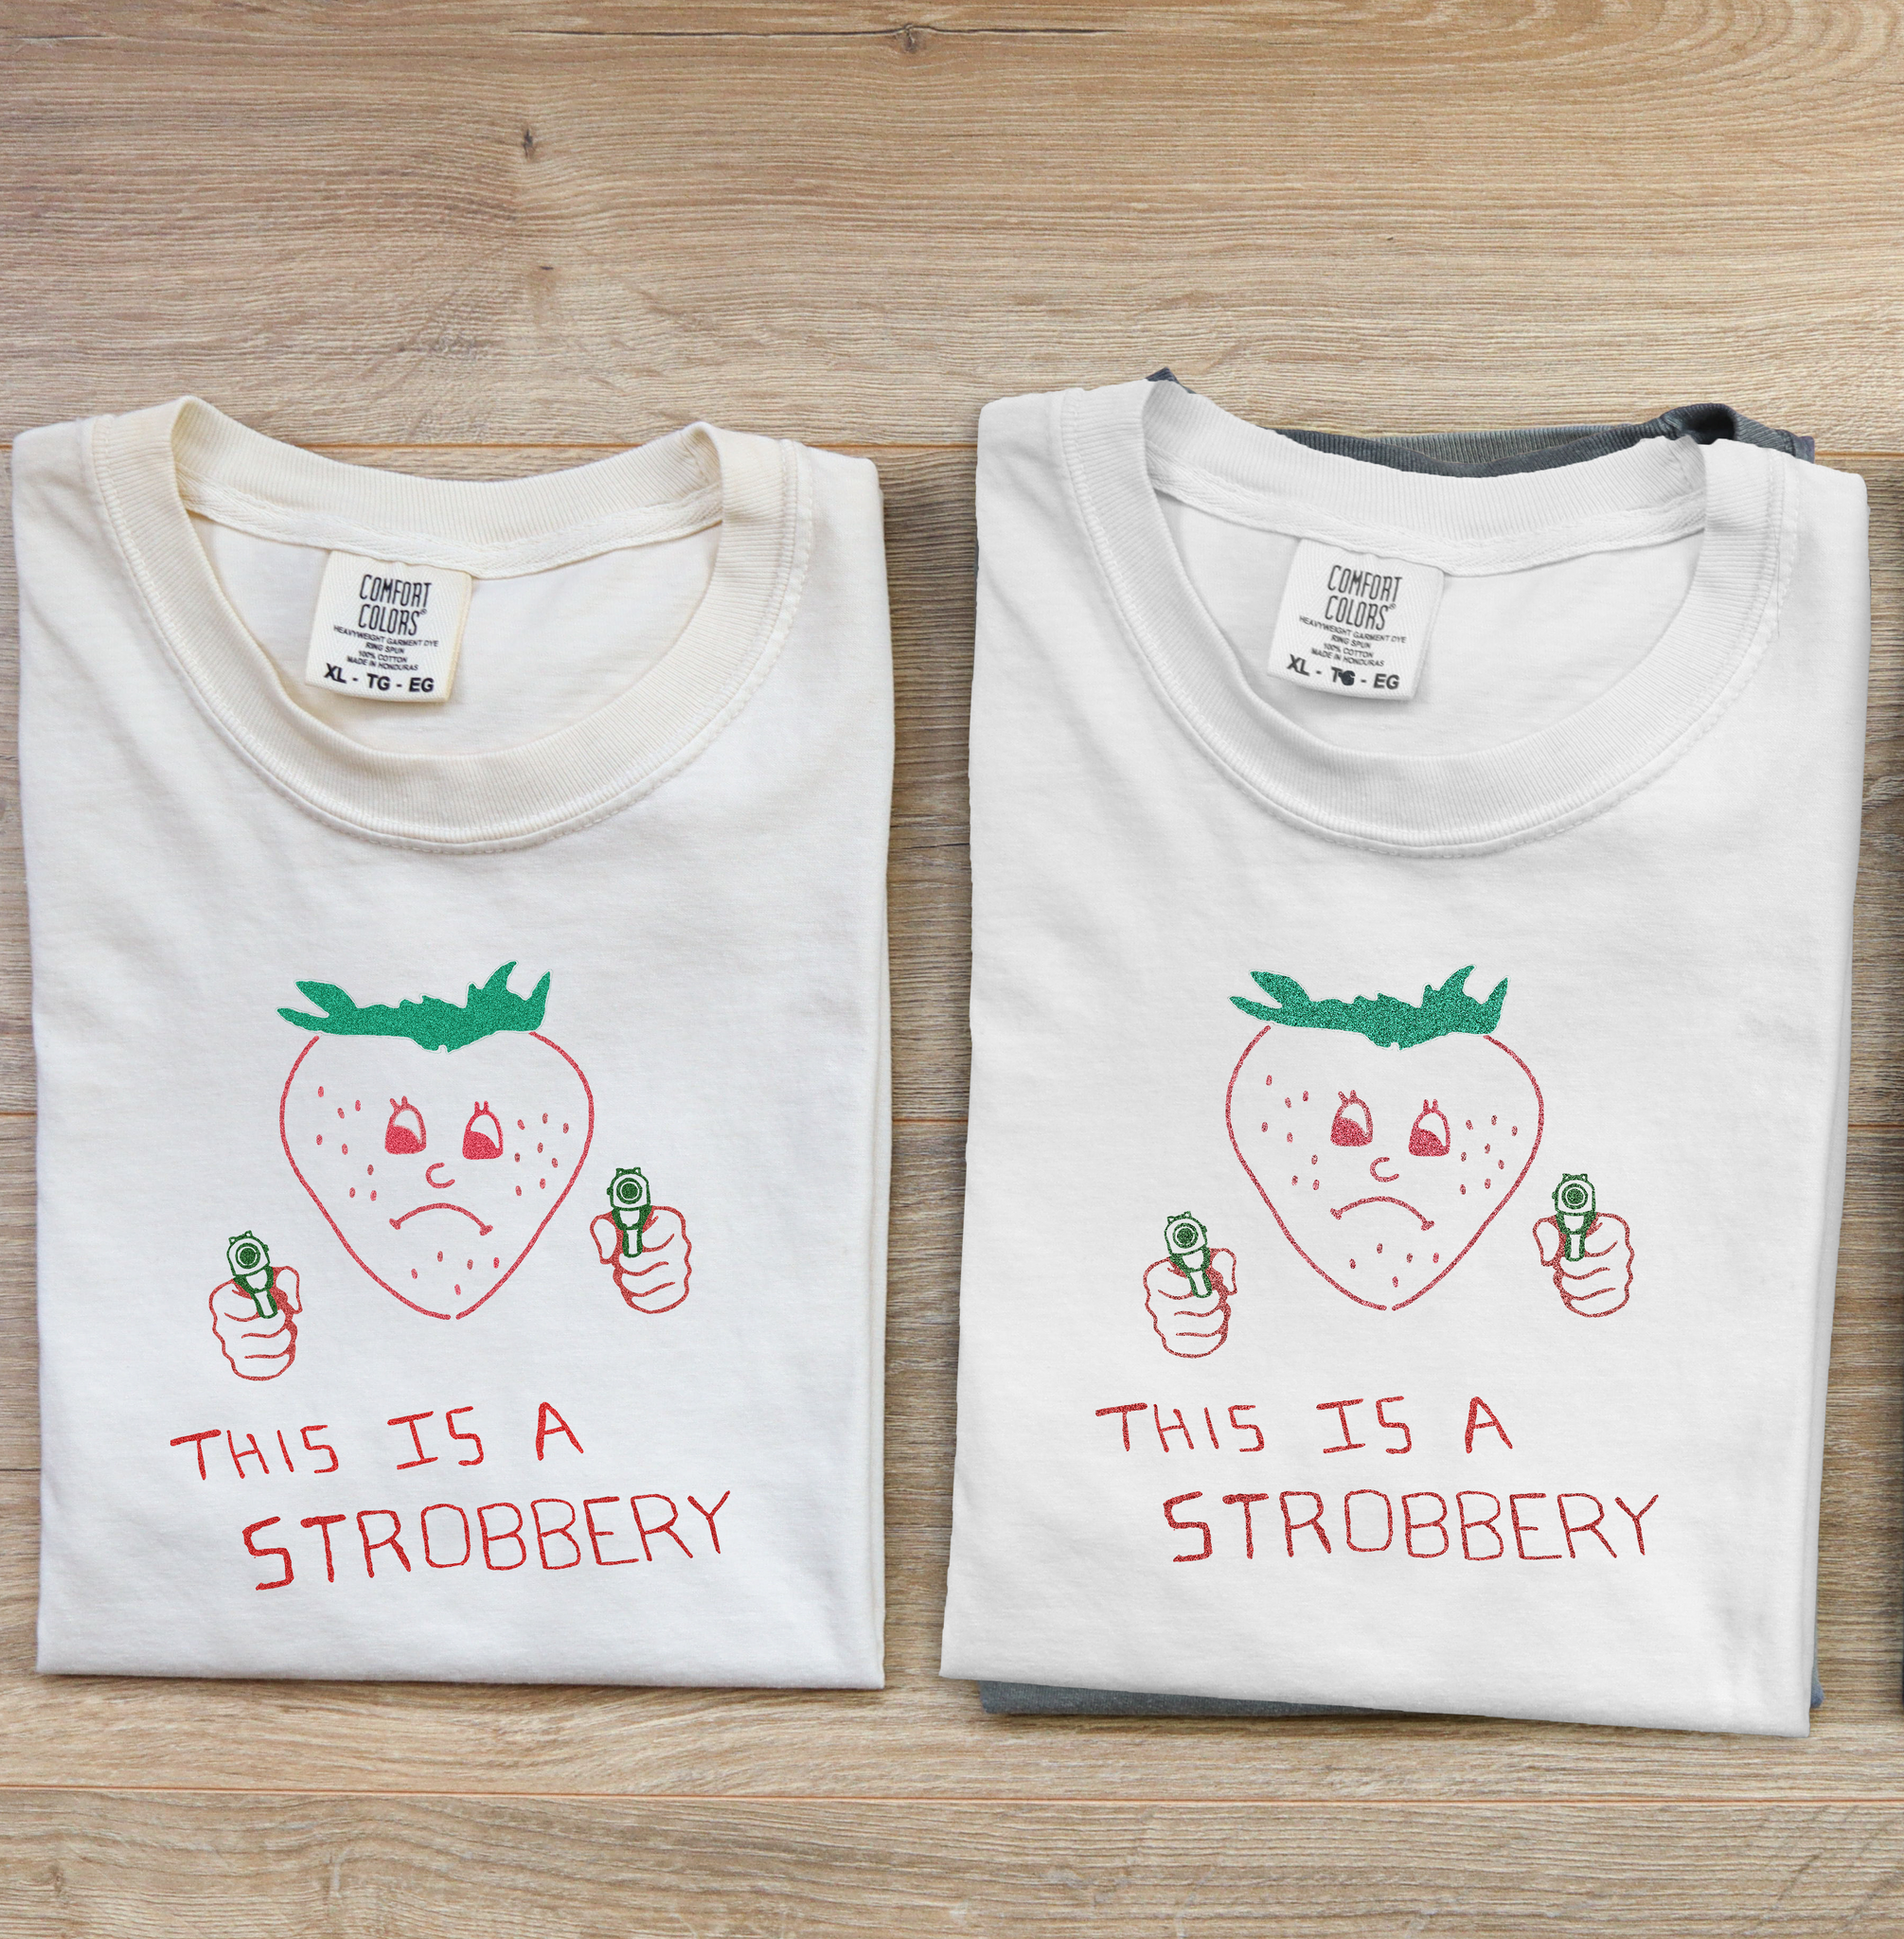 This is a Strobbery Unisex Garment-Dyed T-shirt